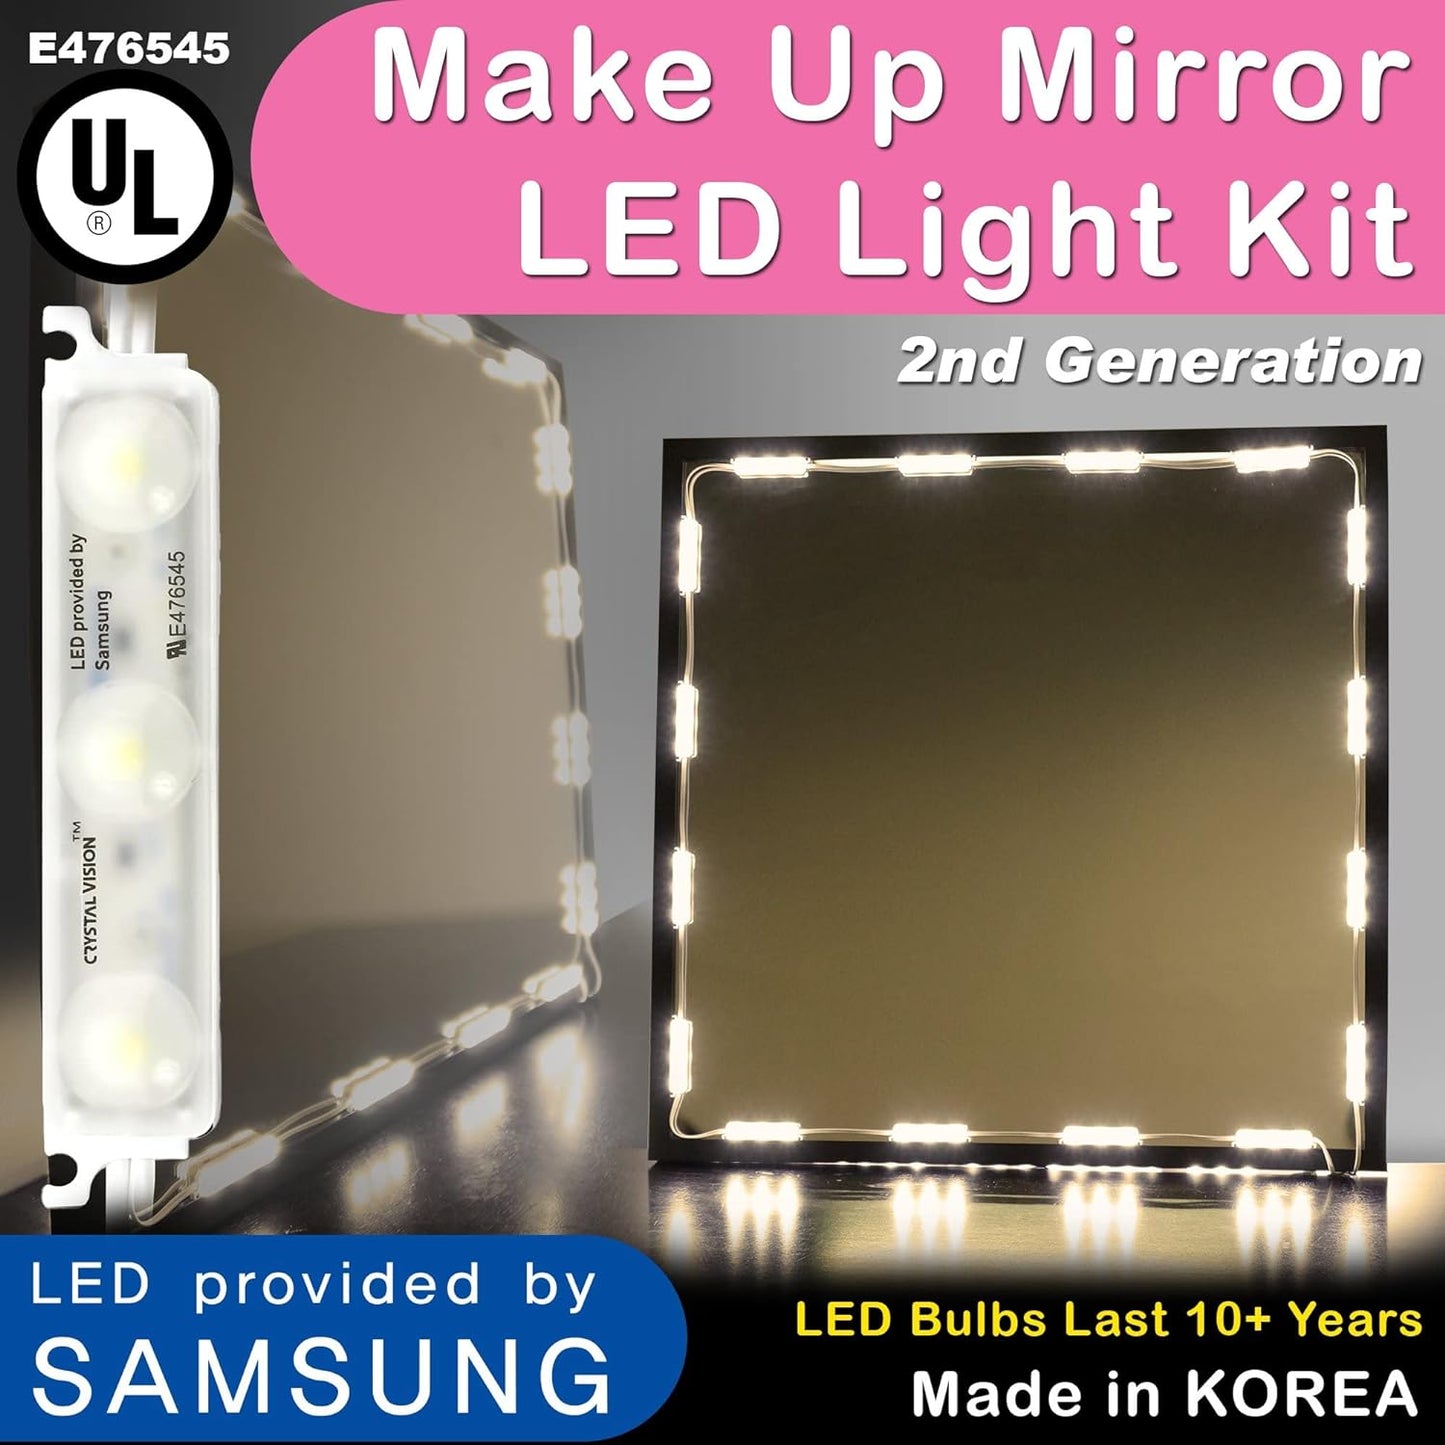 Crystal Vision Hollywood Style Makeup Mirror LED Light Kit Provided by Samsung for Cosmetic Mirror Vanity Mirror w/ Dimmer Controller (75 LED Bulb / 12.5ft) [Warm White]